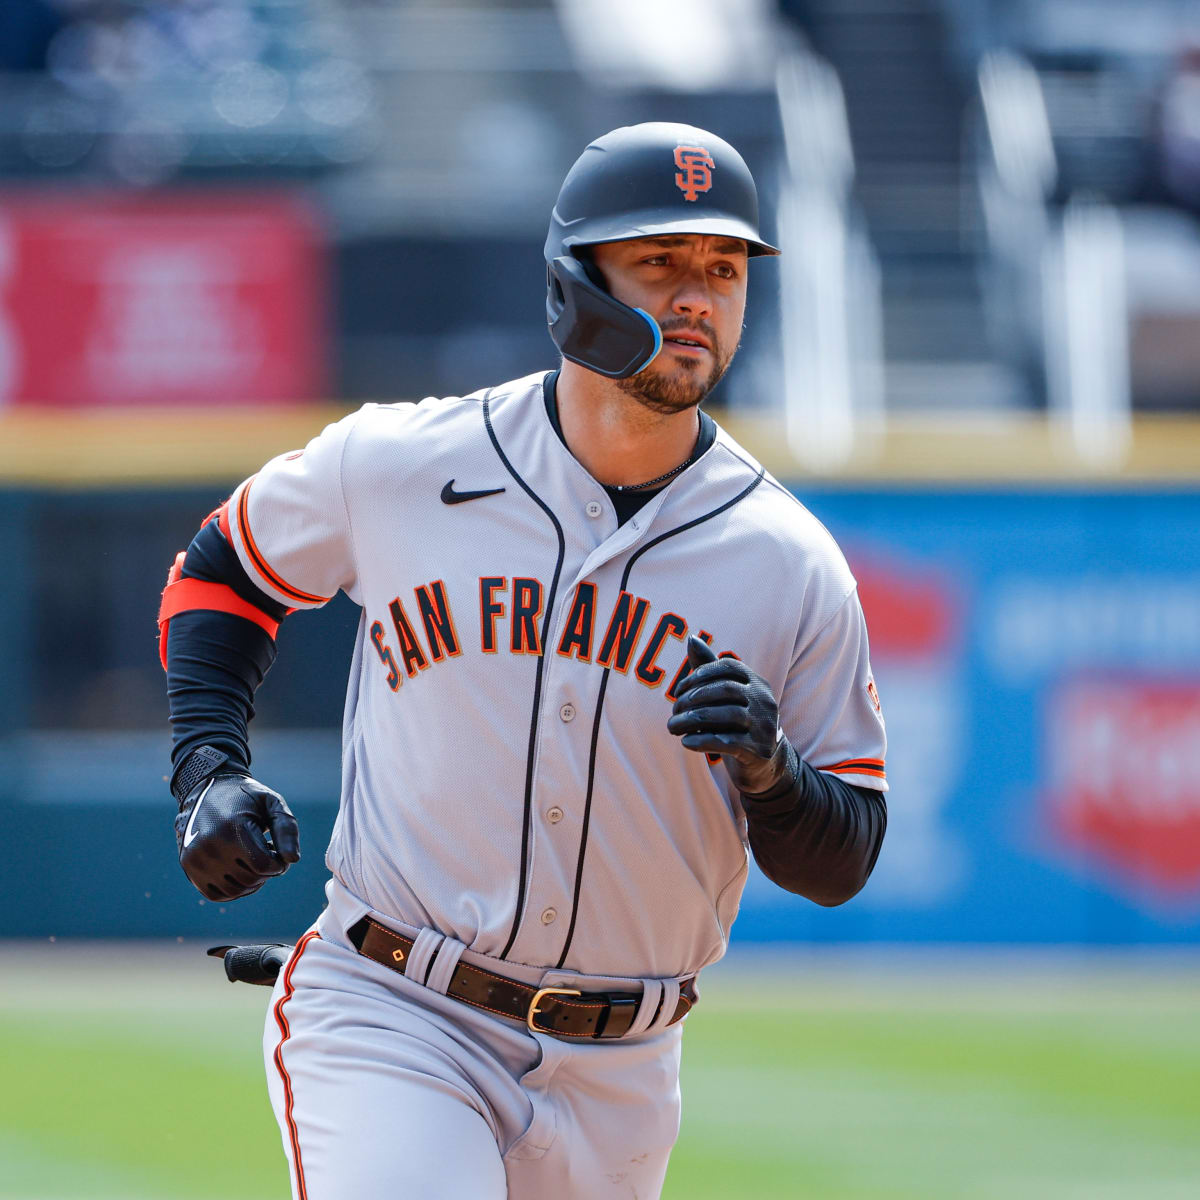 Mitch Haniger's oblique strain challenges Giants outfield depth - McCovey  Chronicles